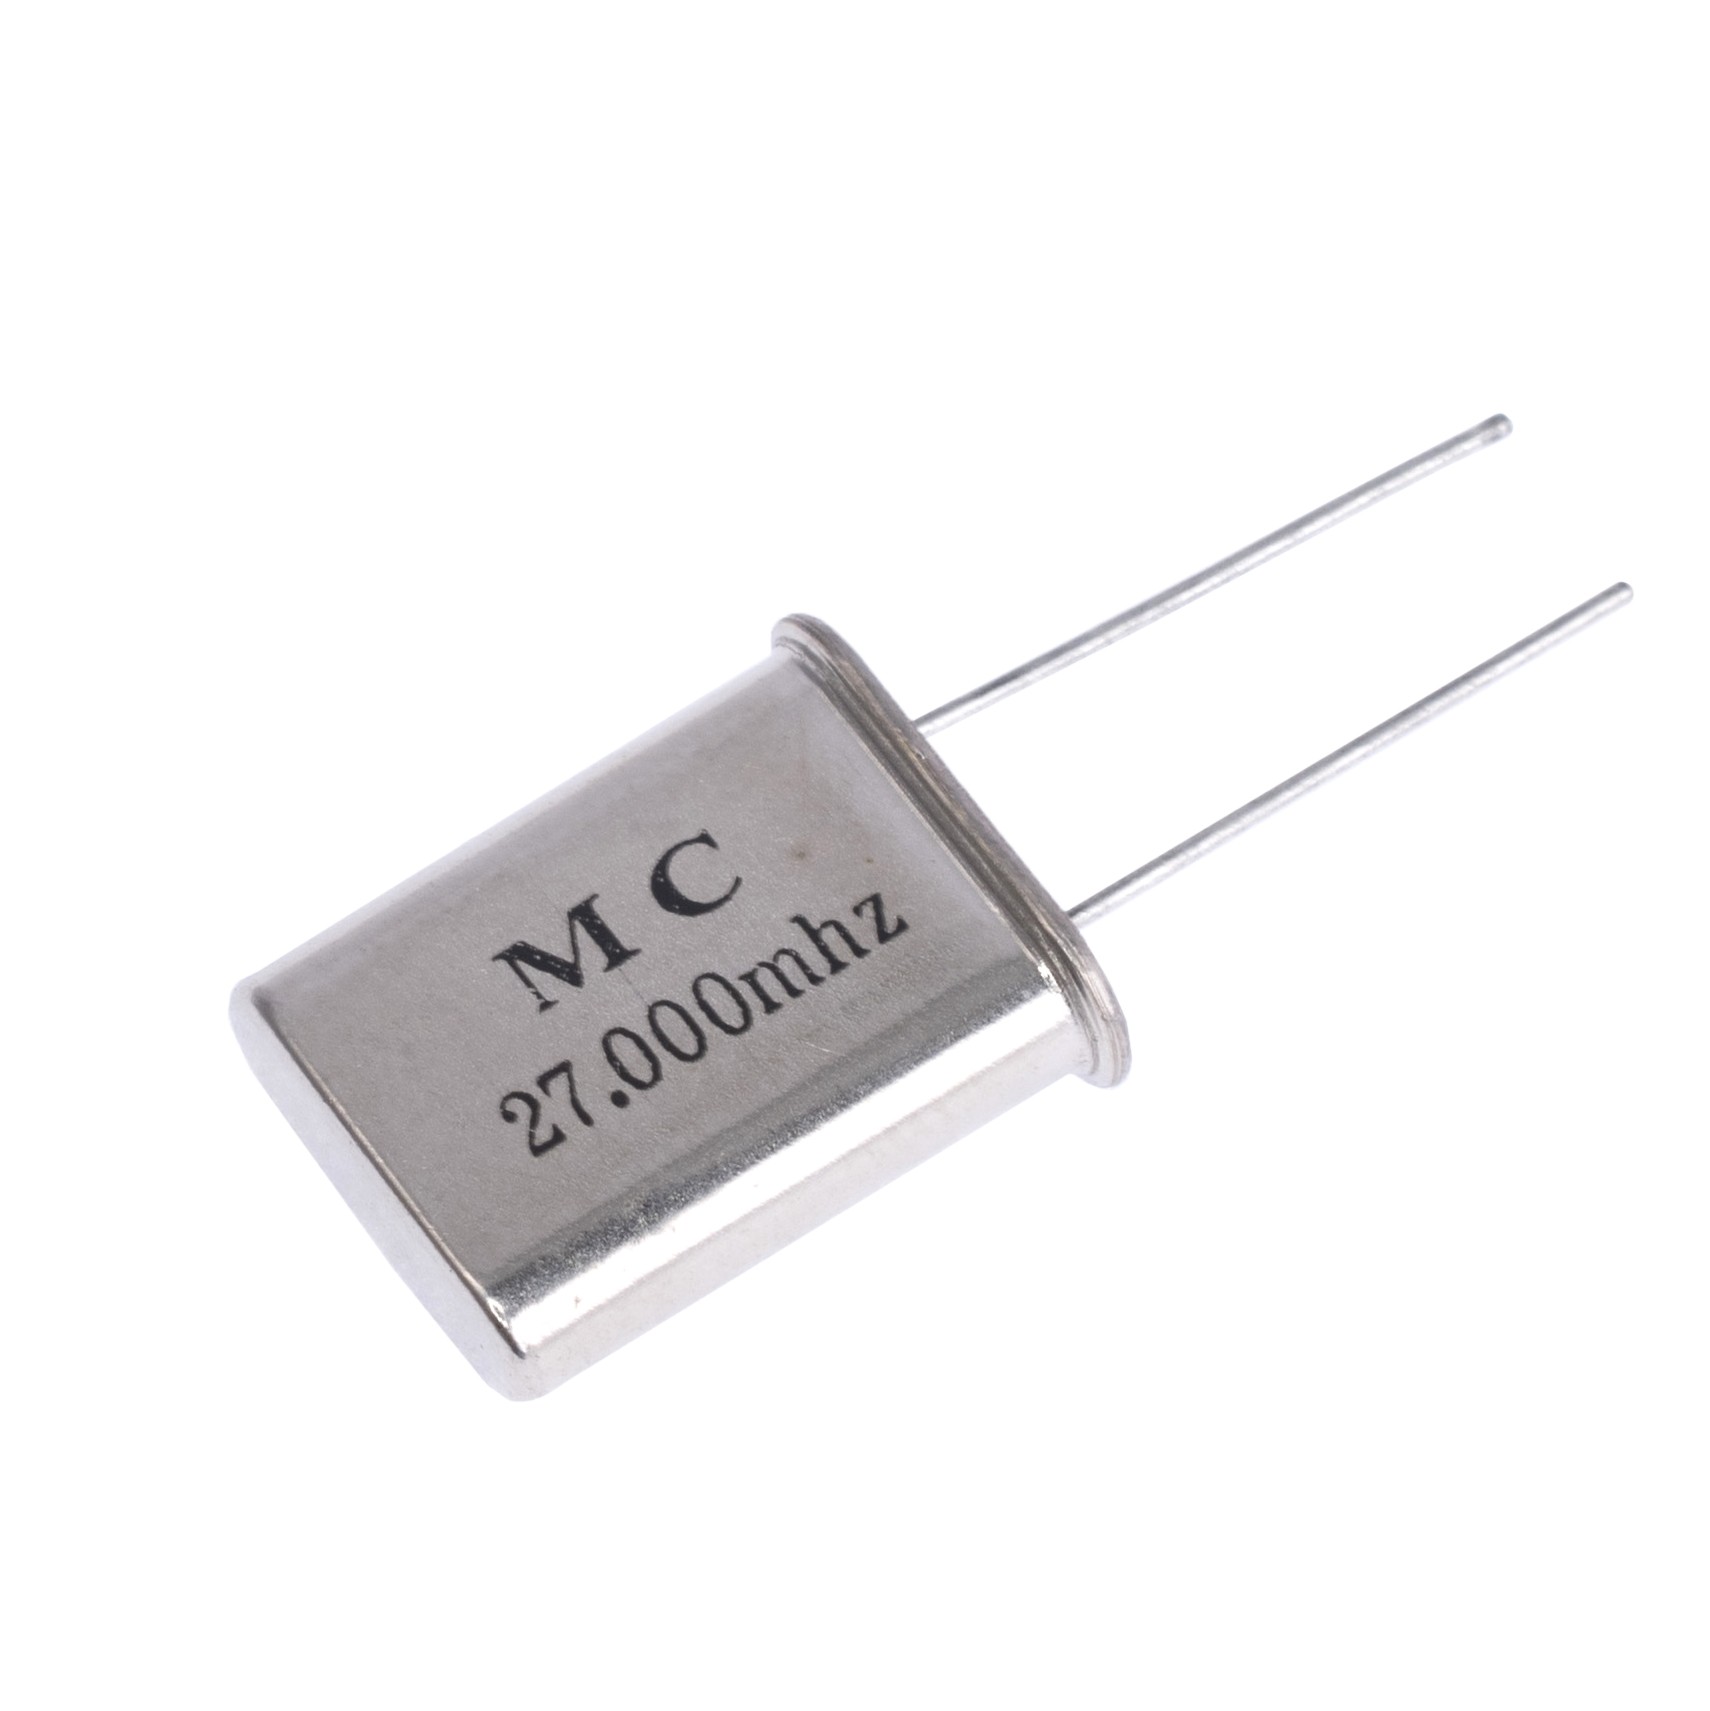 5 pieces 85C 40C Crystals 24.0MHz 18pF 30ppm 